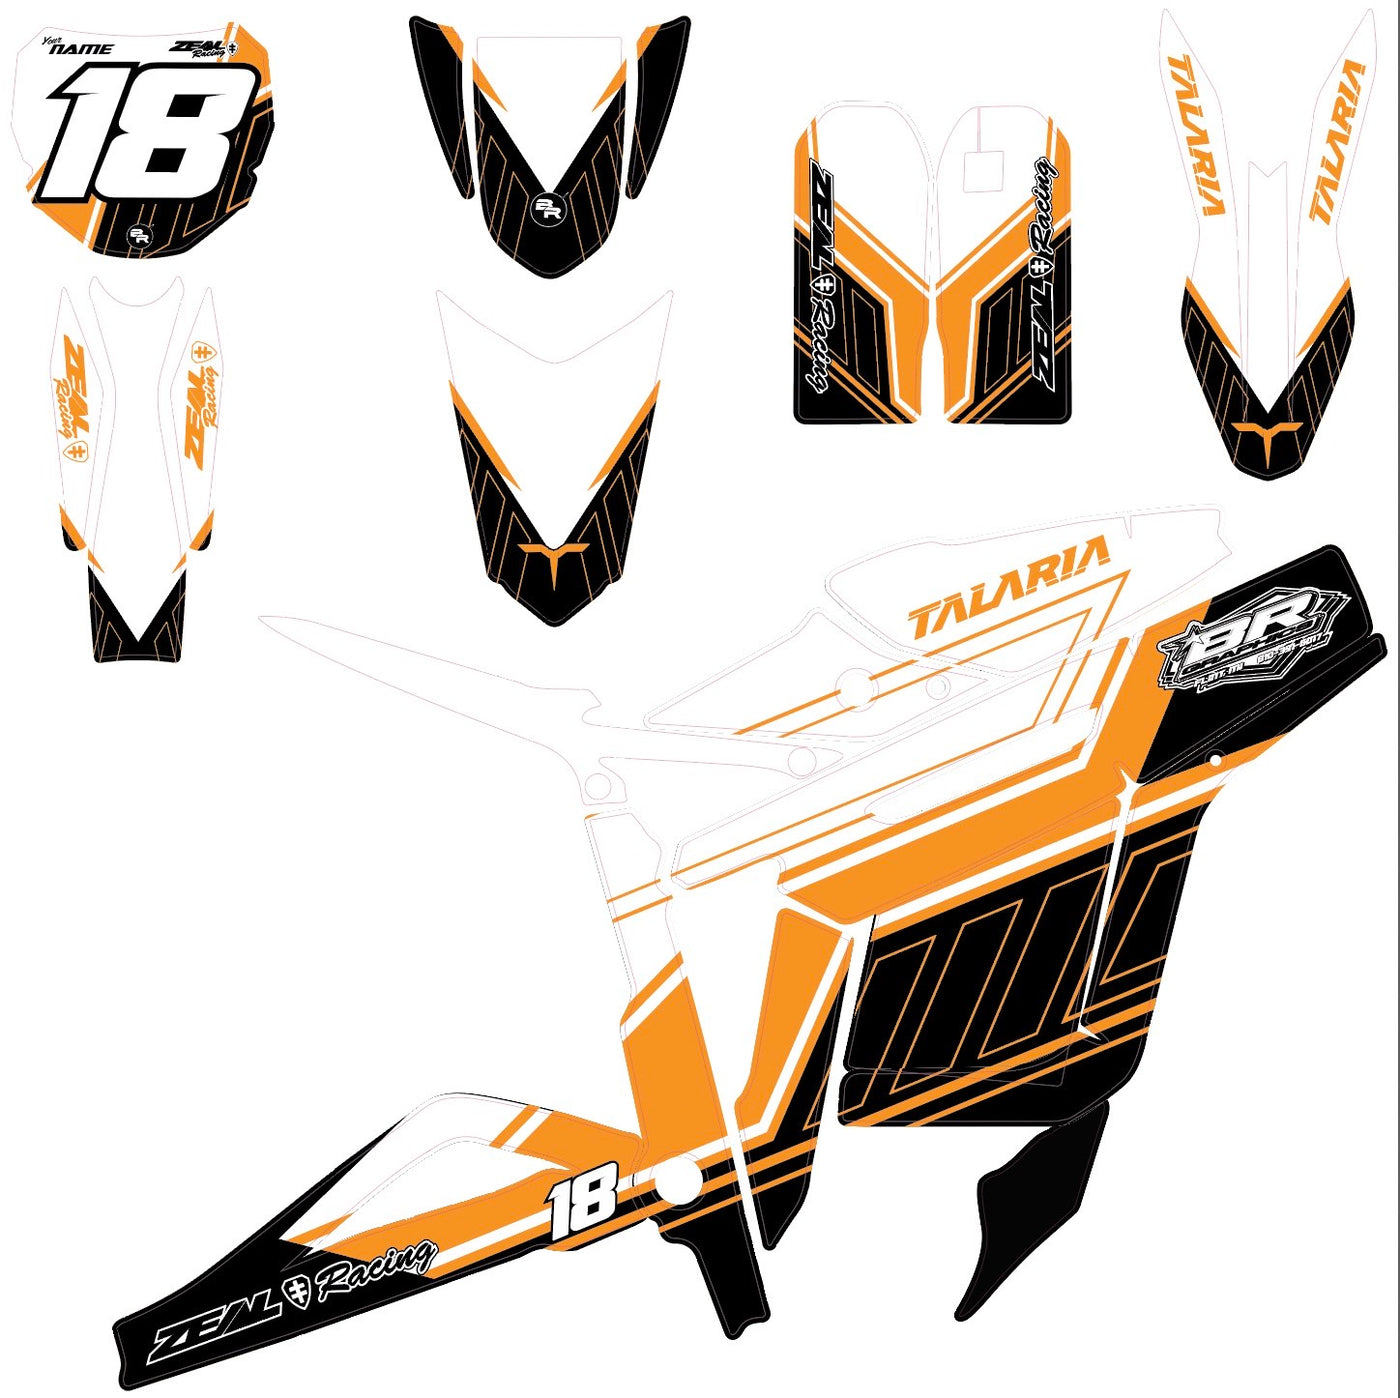 Talaria Sting STAGGER Graphic Kit